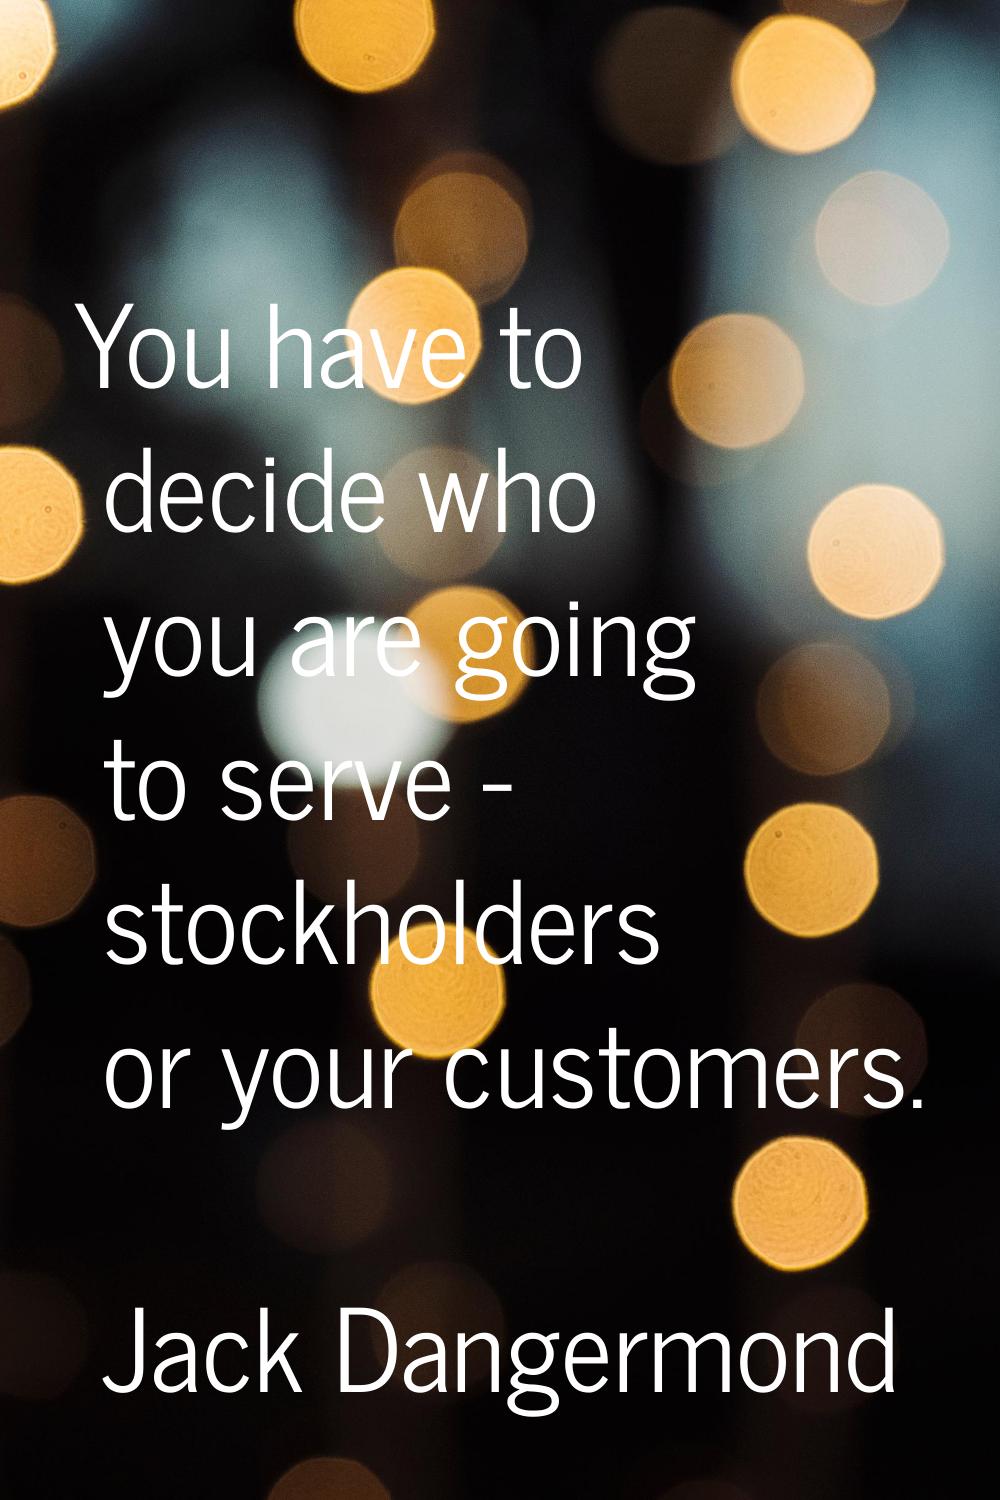 You have to decide who you are going to serve - stockholders or your customers.